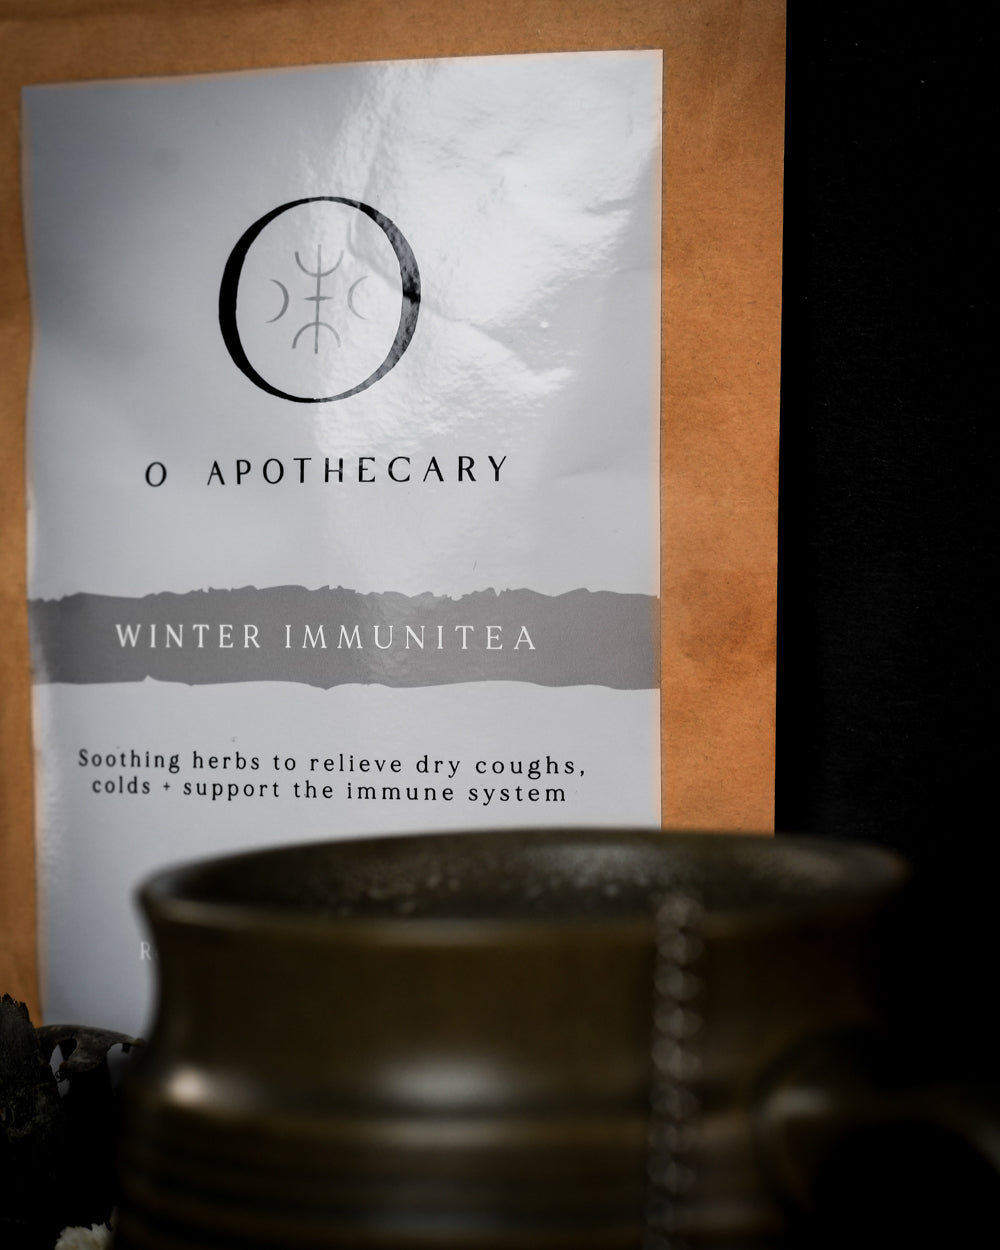 Winter Immune Tea by O Apothecary